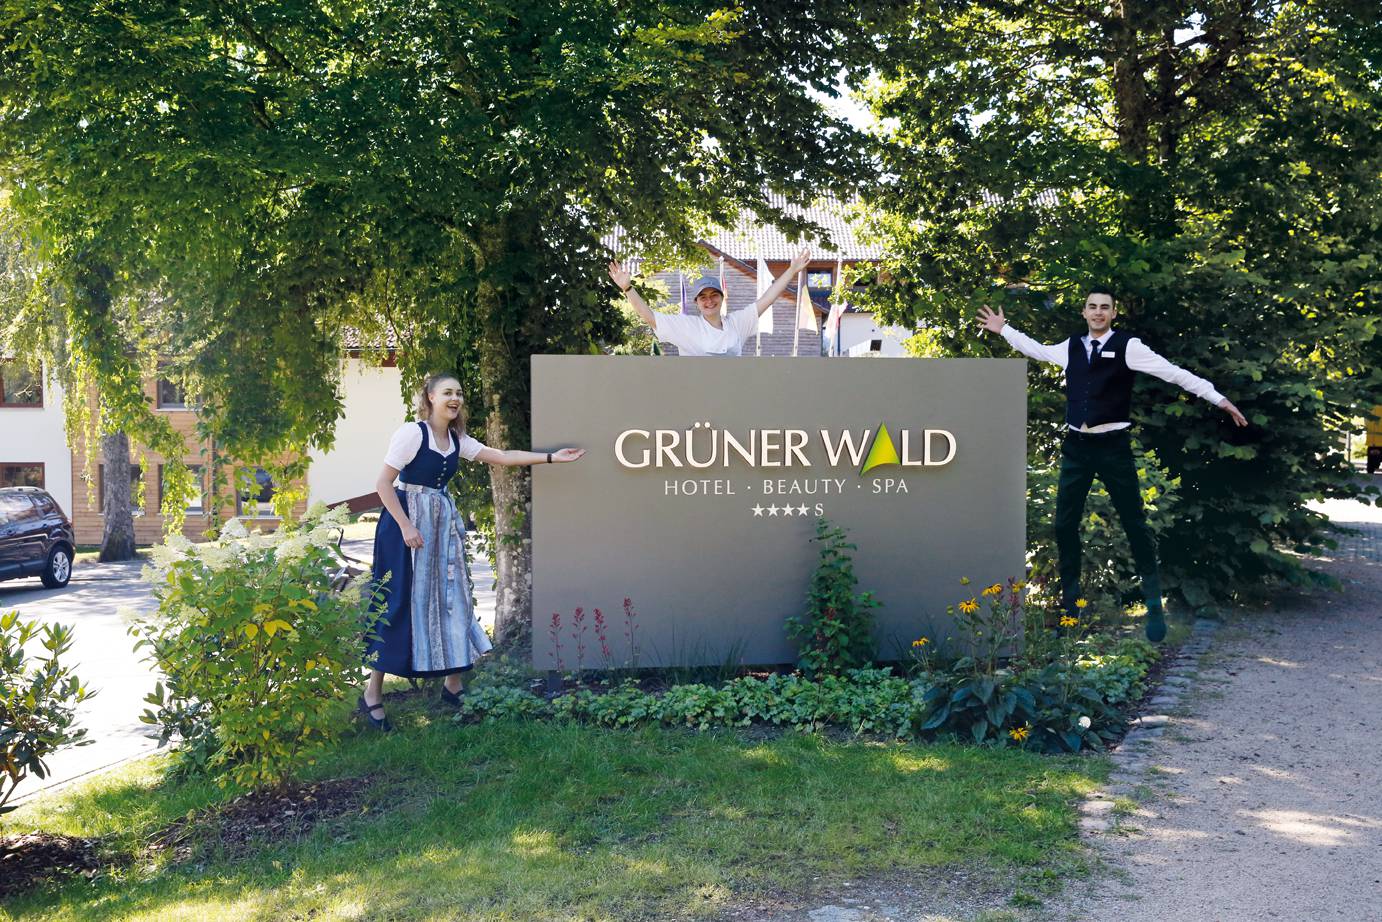 employees: Our - Hotel Grüner Wald